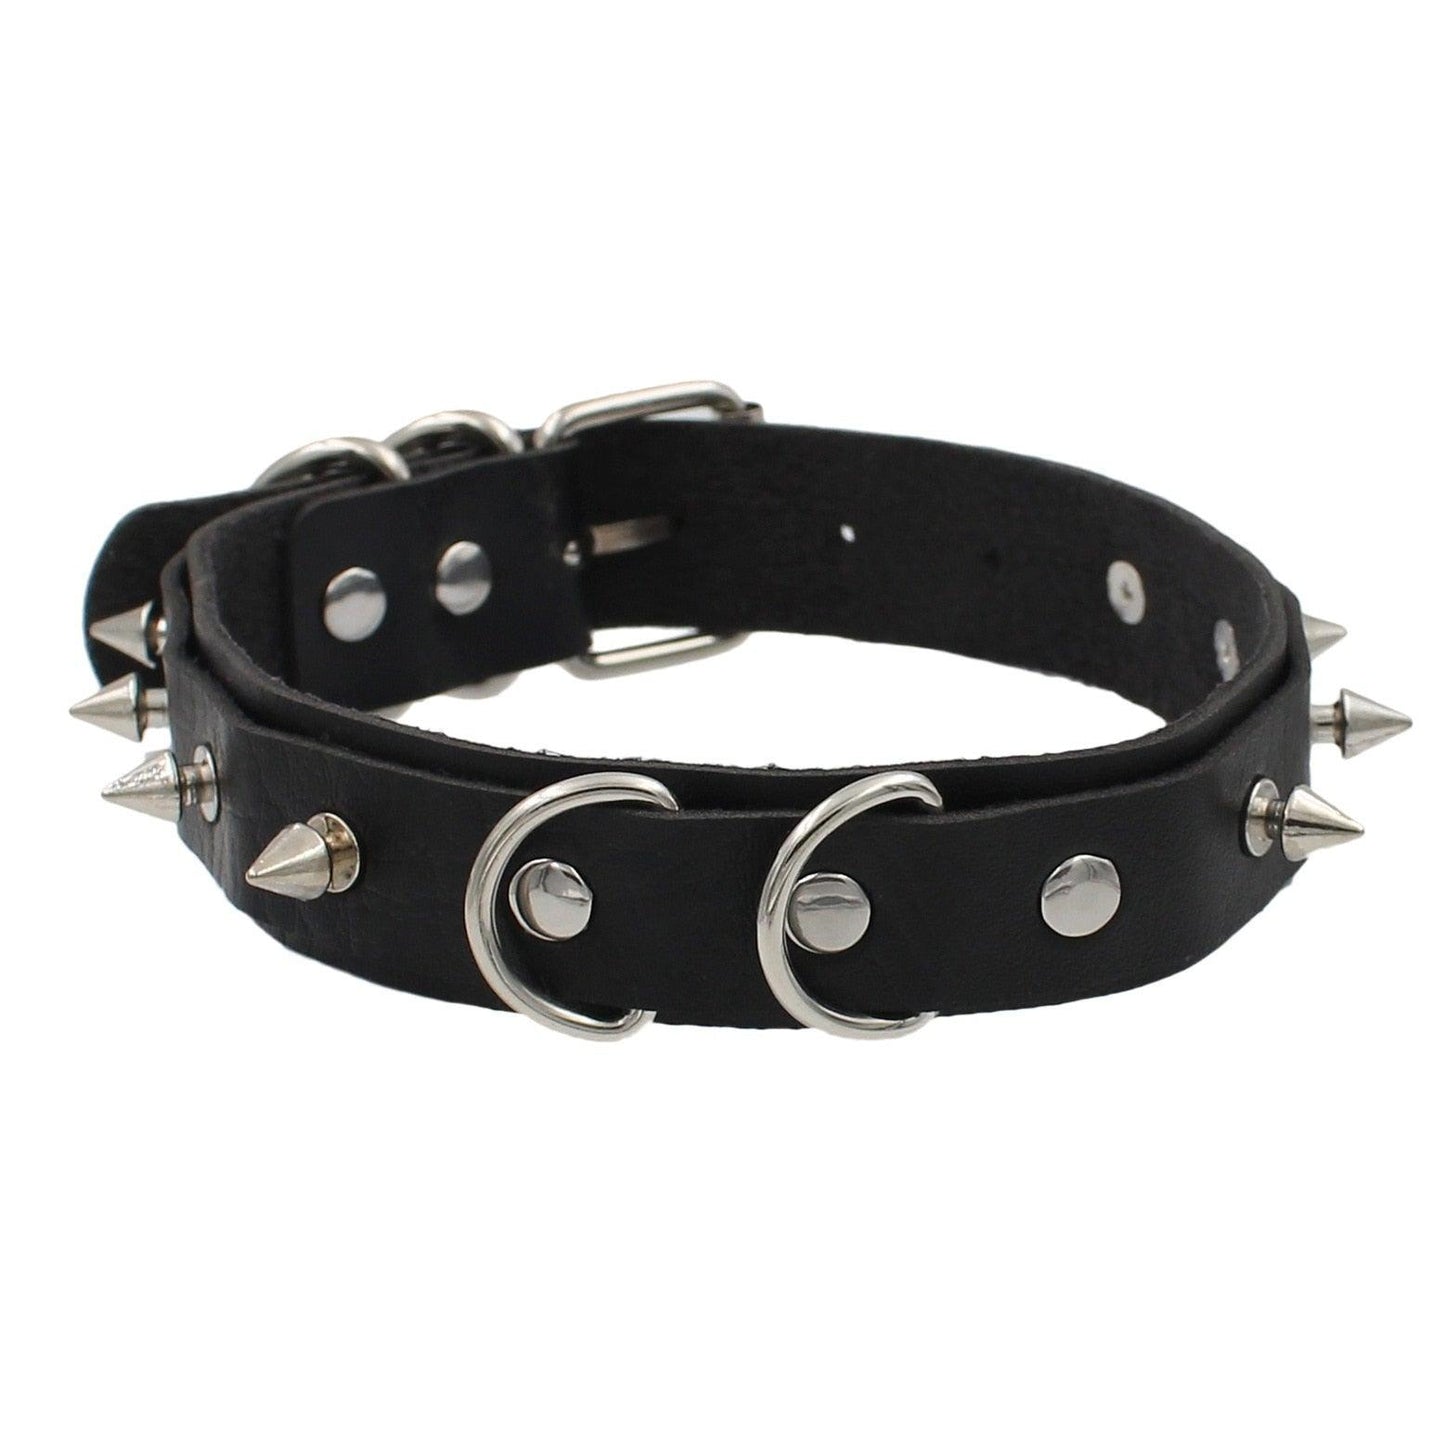 Black Leather Gothic Choker Collection - Rivet Dots Choker - Femboy Fatale